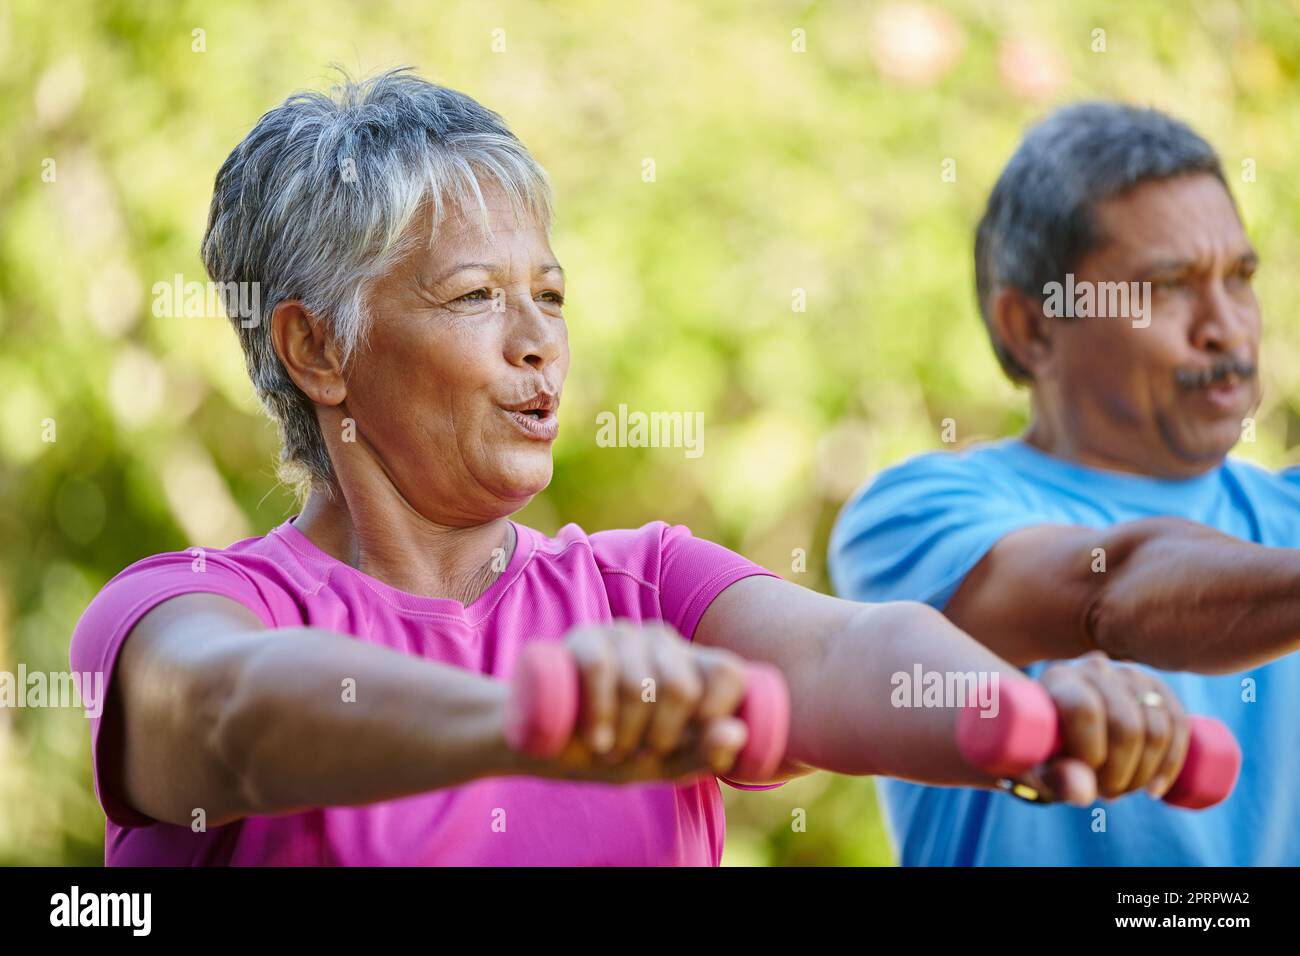 Work those muscles. Portrait of a mature couple exercising together in their backyard. Stock Photo